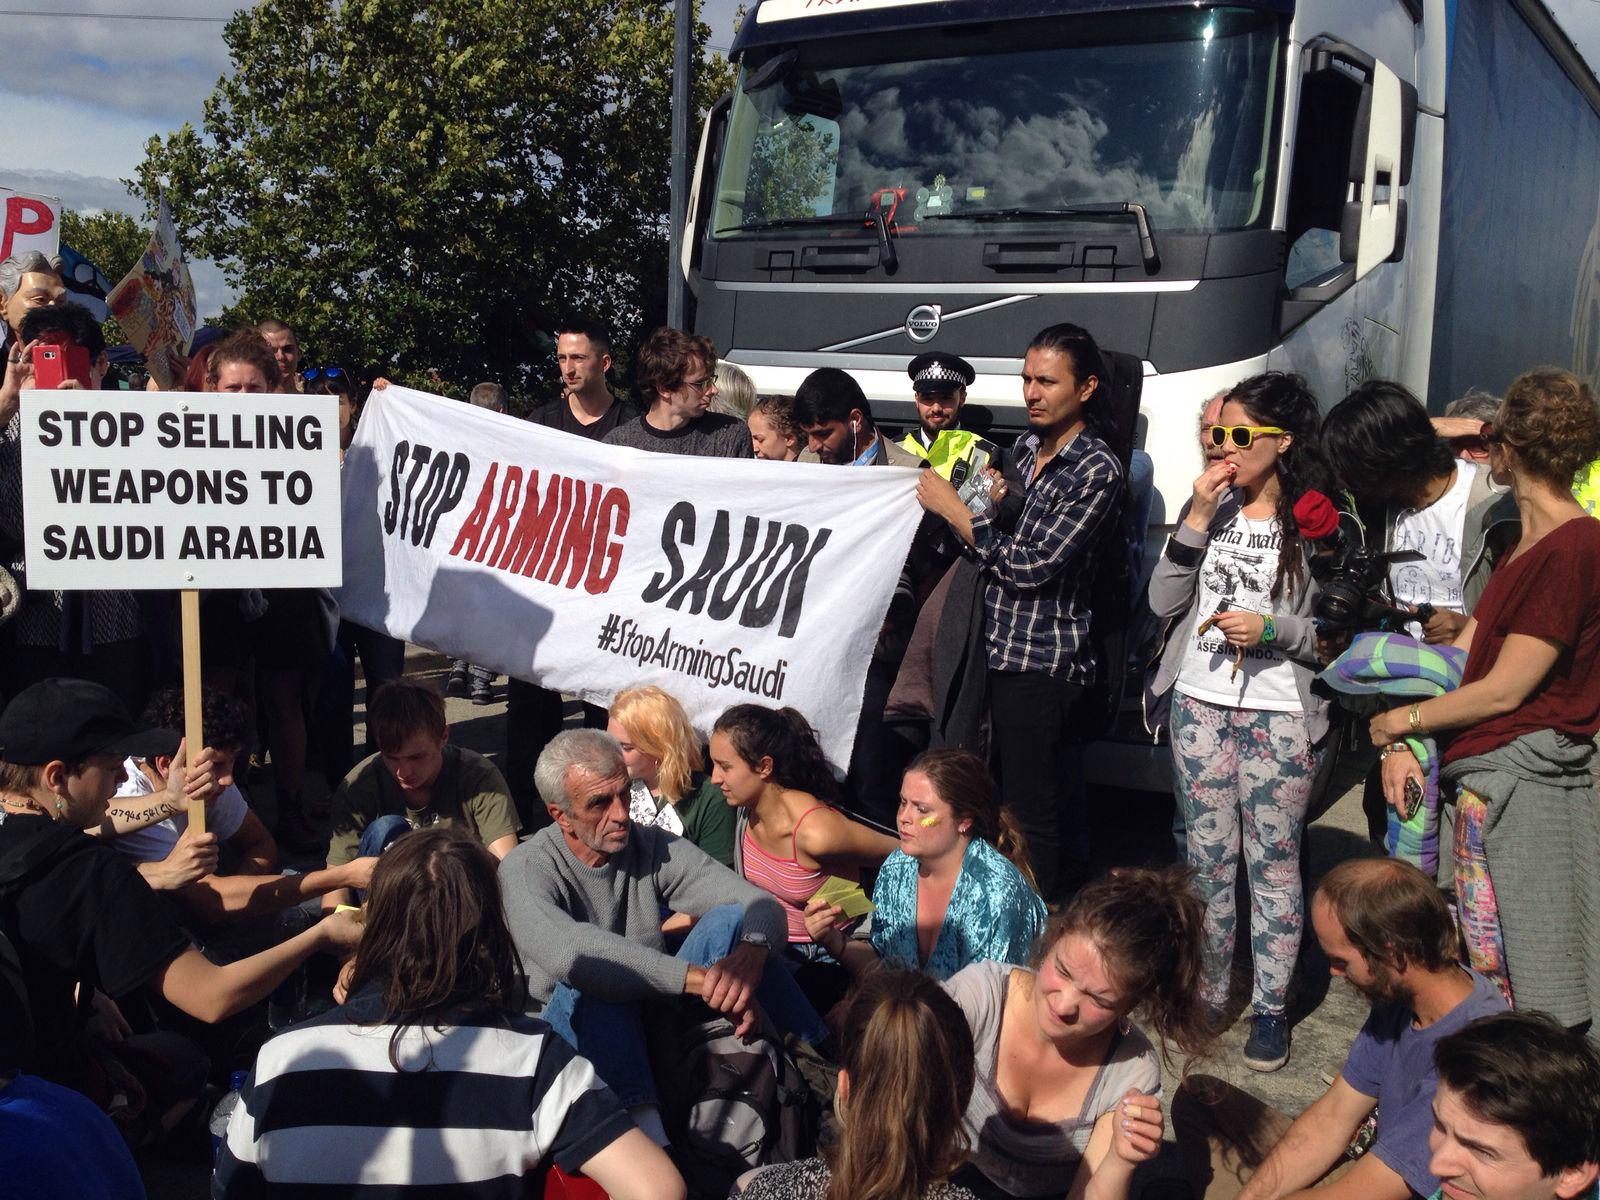 Stop Arming Saudi banner held by ten activists in front of a truck. Twenty activists sat in front of the banner. An activist with yellow sunglasses long dark hair and patterned leggings is eating it appears a piece of fruit watching on,.